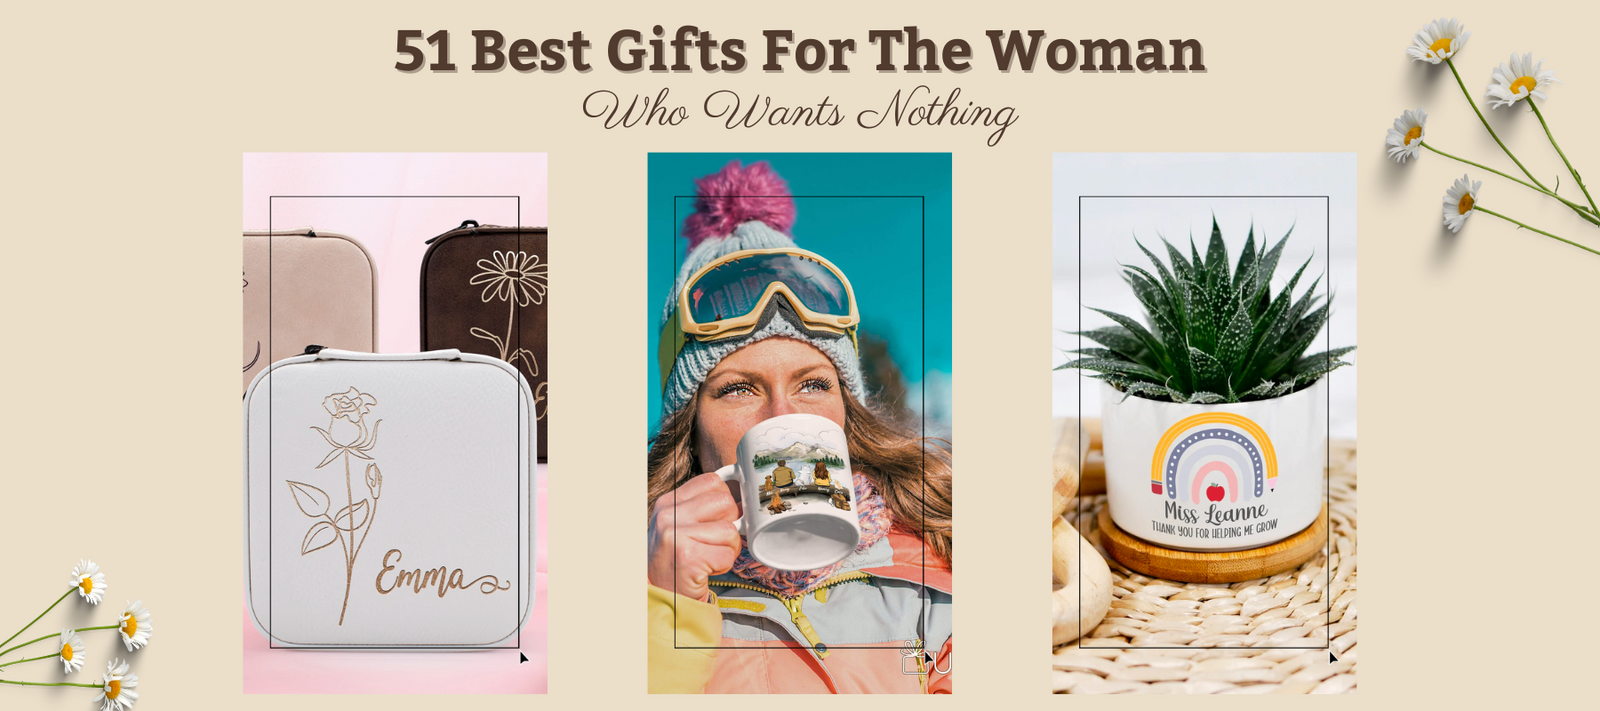 20+ Unique Gift Ideas For The Woman Who Wants Nothing